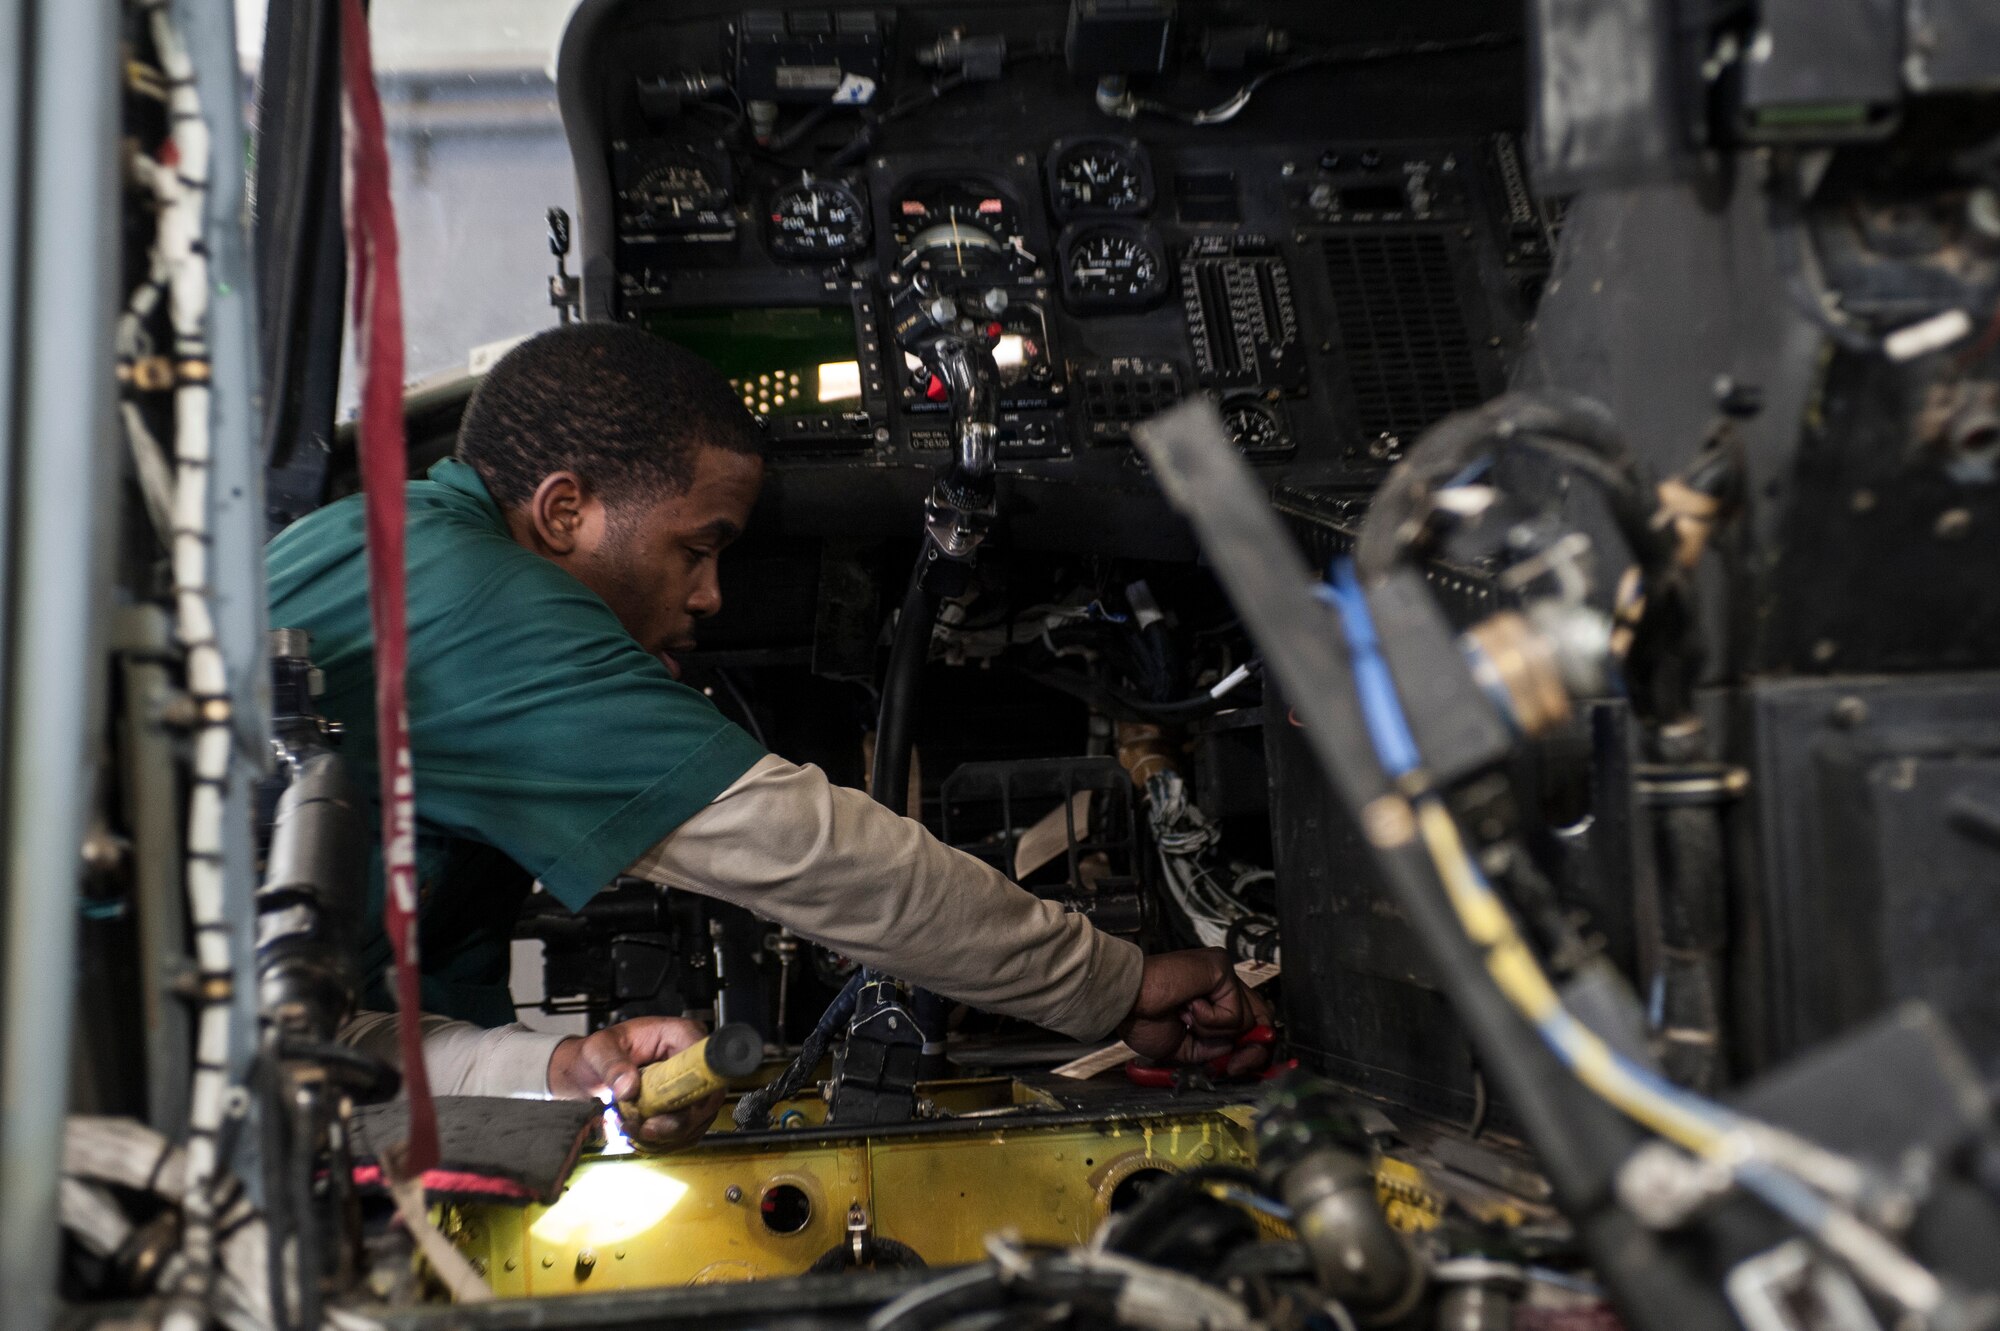 Staff Sgt. Warrell Rickets, 823rd Maintenance Squadron specialist, prepares to remove an adel clamp on an HH-60G Pave Hawk at Nellis Air Force Base, Nev., Nov. 10, 2015. The adel clamp holds wire bundles together, and Rickets needed to remove the clamp to install a washer on a different component of the aircraft. (U.S. Air Force photo by Staff Sgt. Siuta B. Ika)